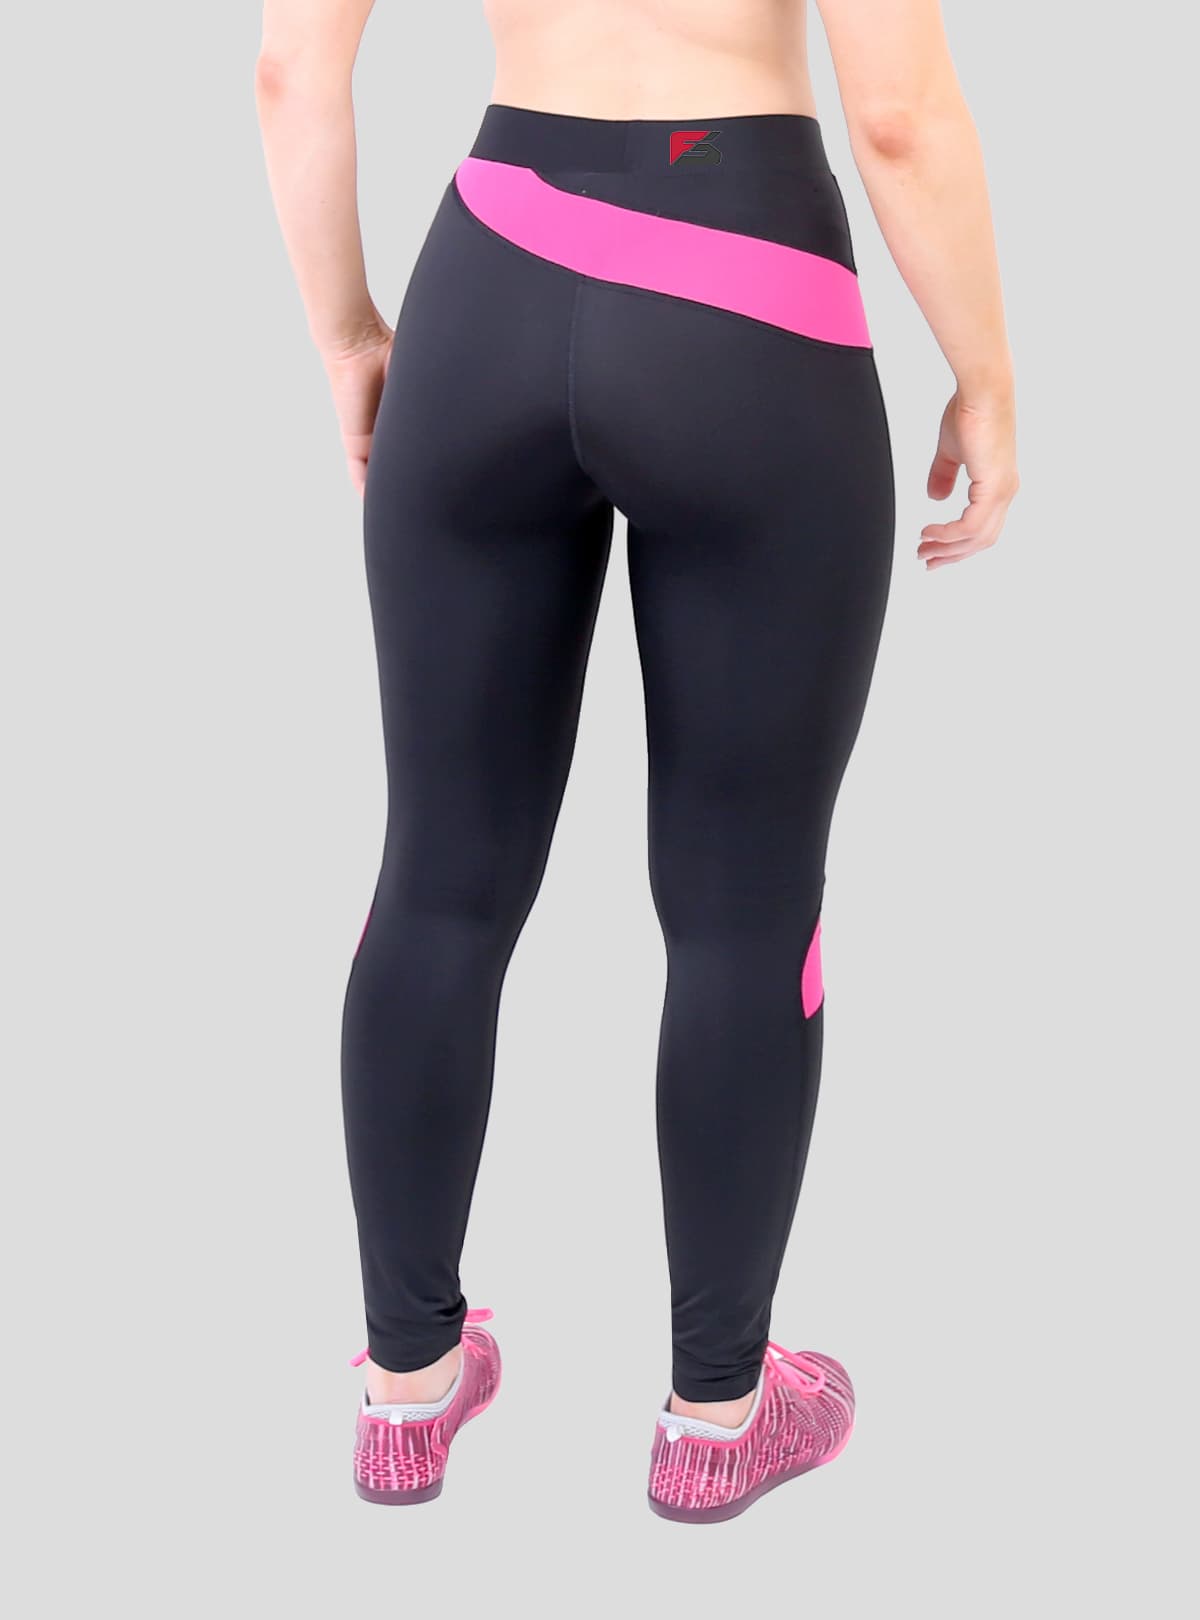 Pink and Black Style Legging_ Yoga Pants_Girls Tights_Fitnes